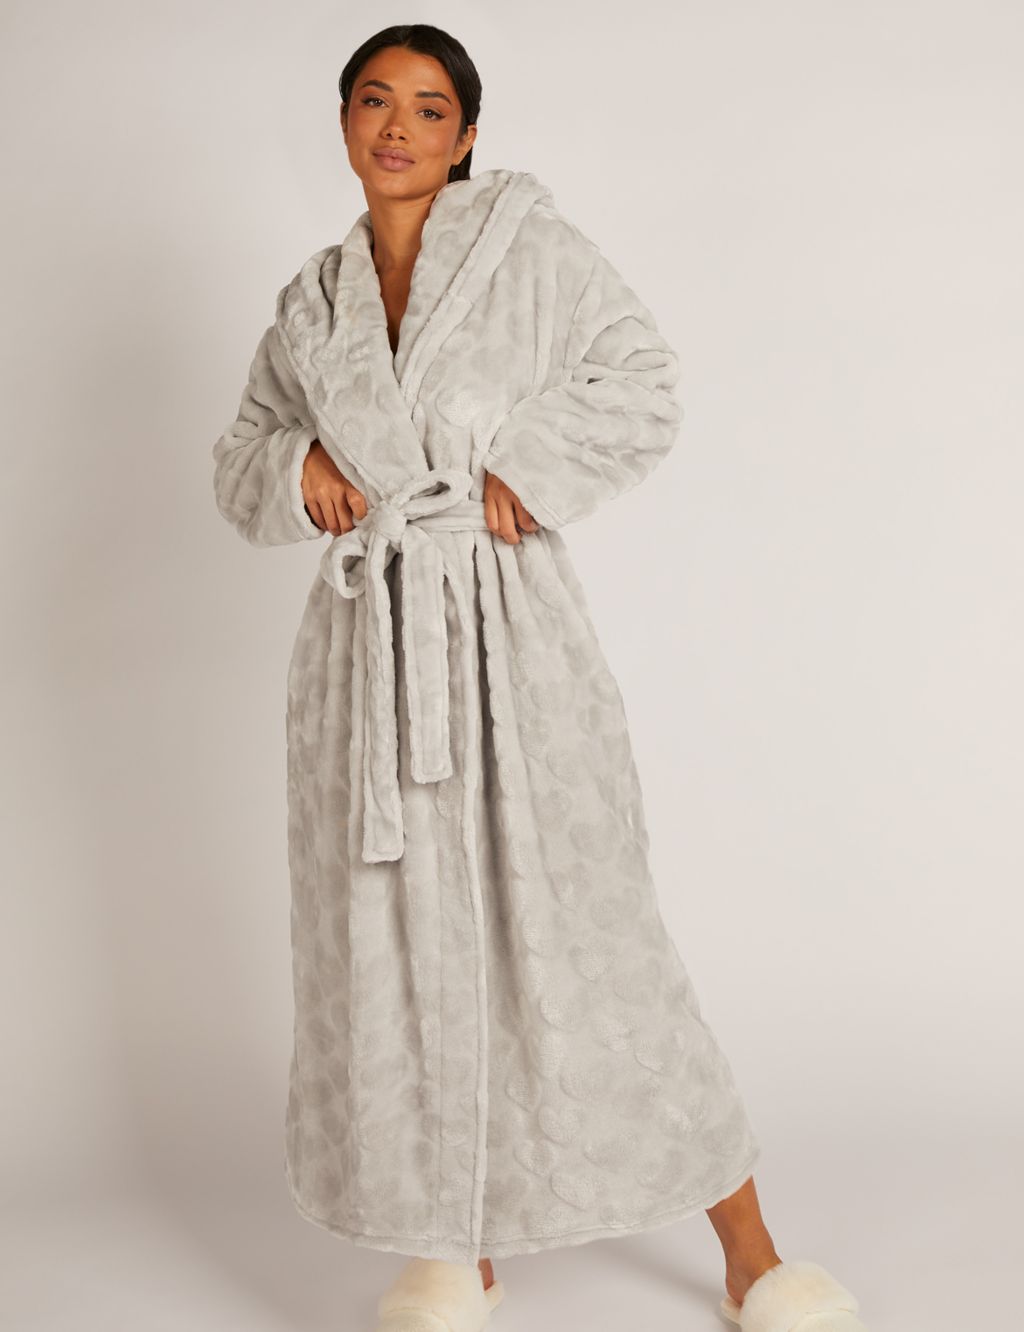 Faux Fur Heart Hooded Long Dressing Gown image 1